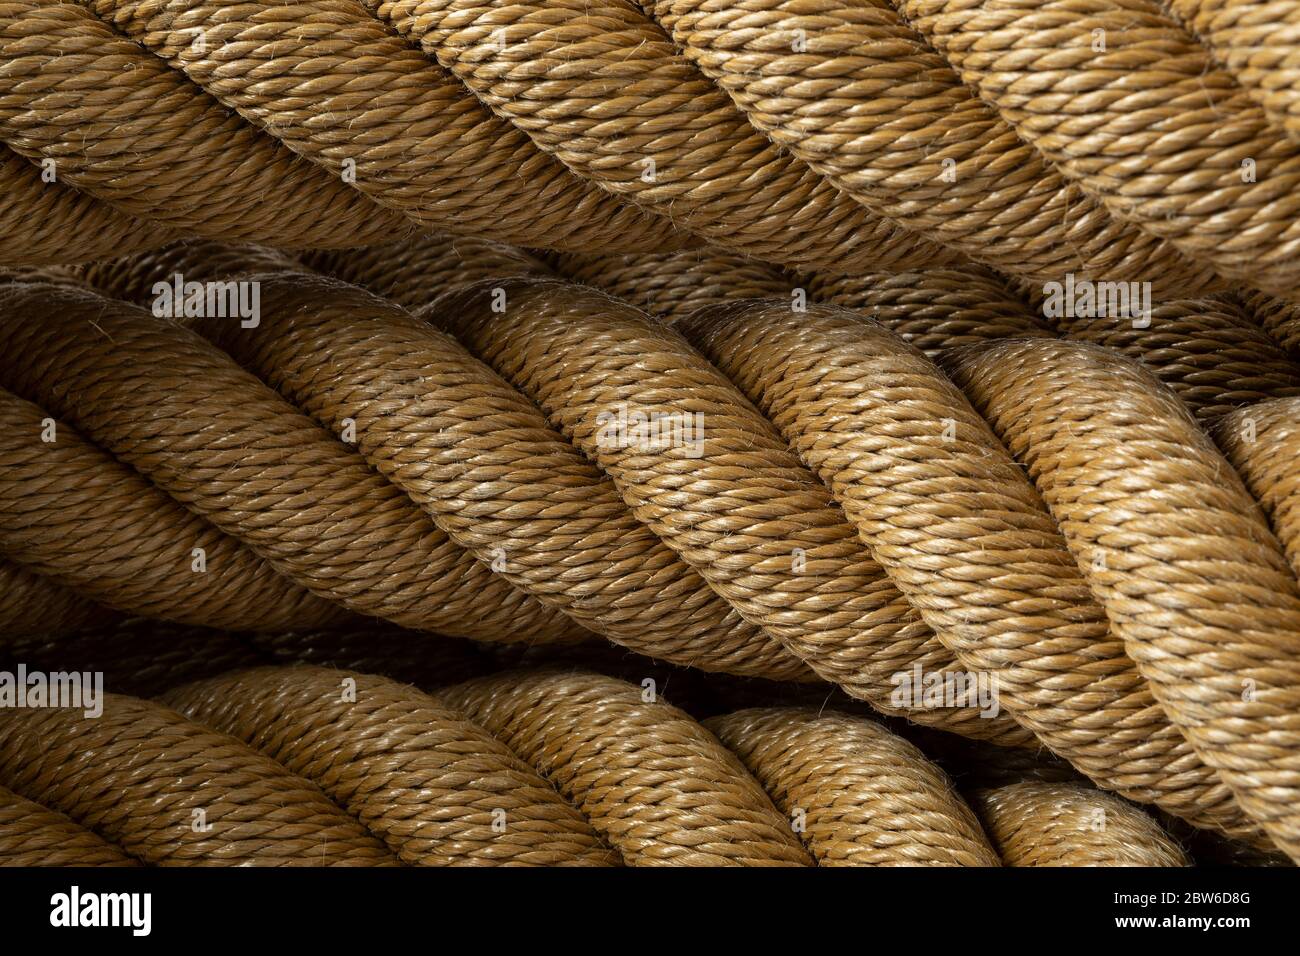 New handmade knotted rope close up full frame Stock Photo